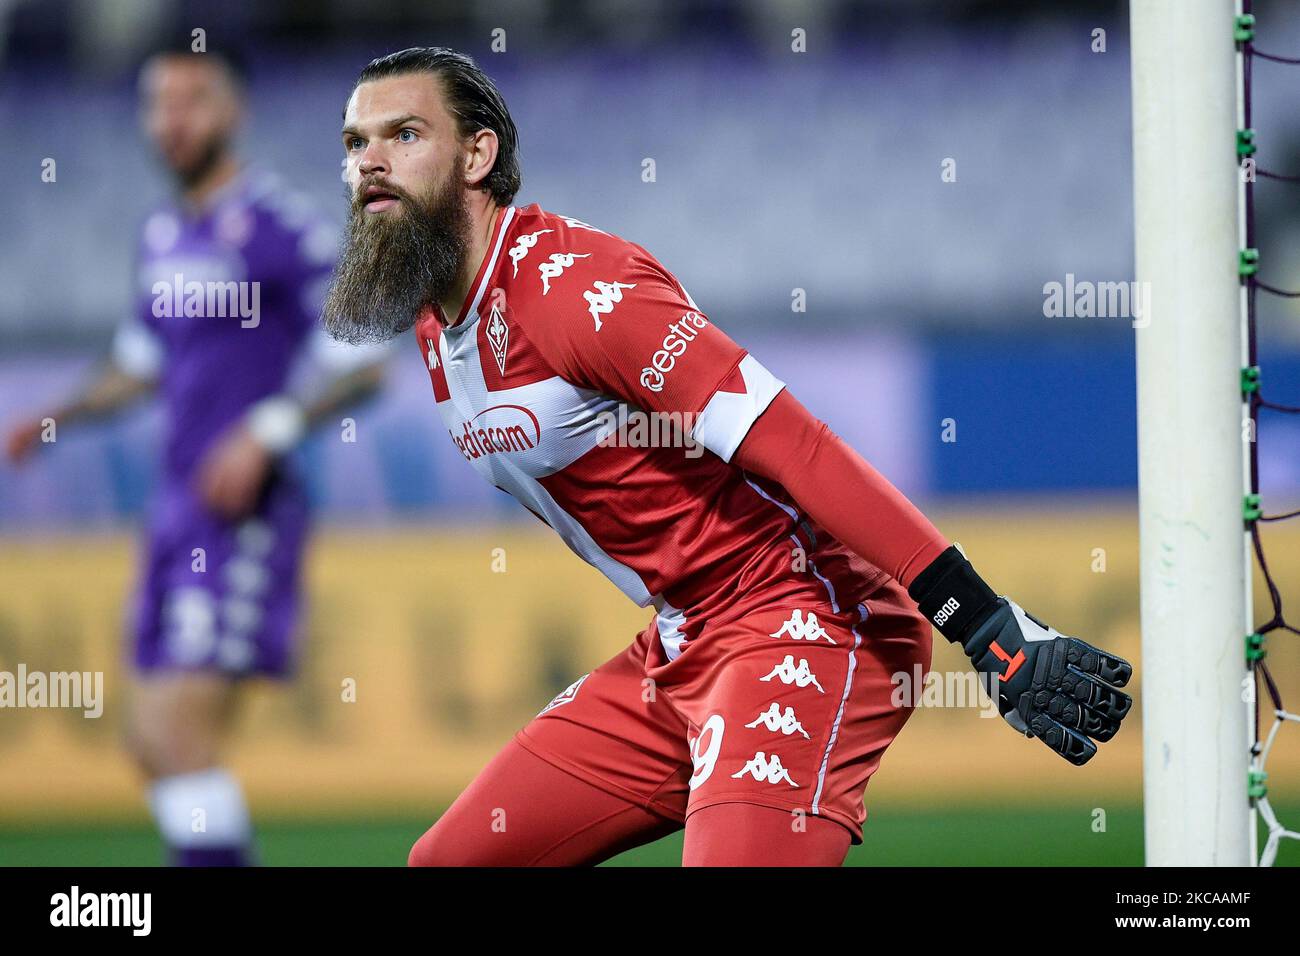 Bartlomiej Dragowski of ACF Fiorentina during the Serie A match between ACF Fiorentina and AS Roma at Stadio Artemio Franchi, Florence, Italy on 3 March 2021. (Photo by Giuseppe Maffia/NurPhoto) Stock Photo